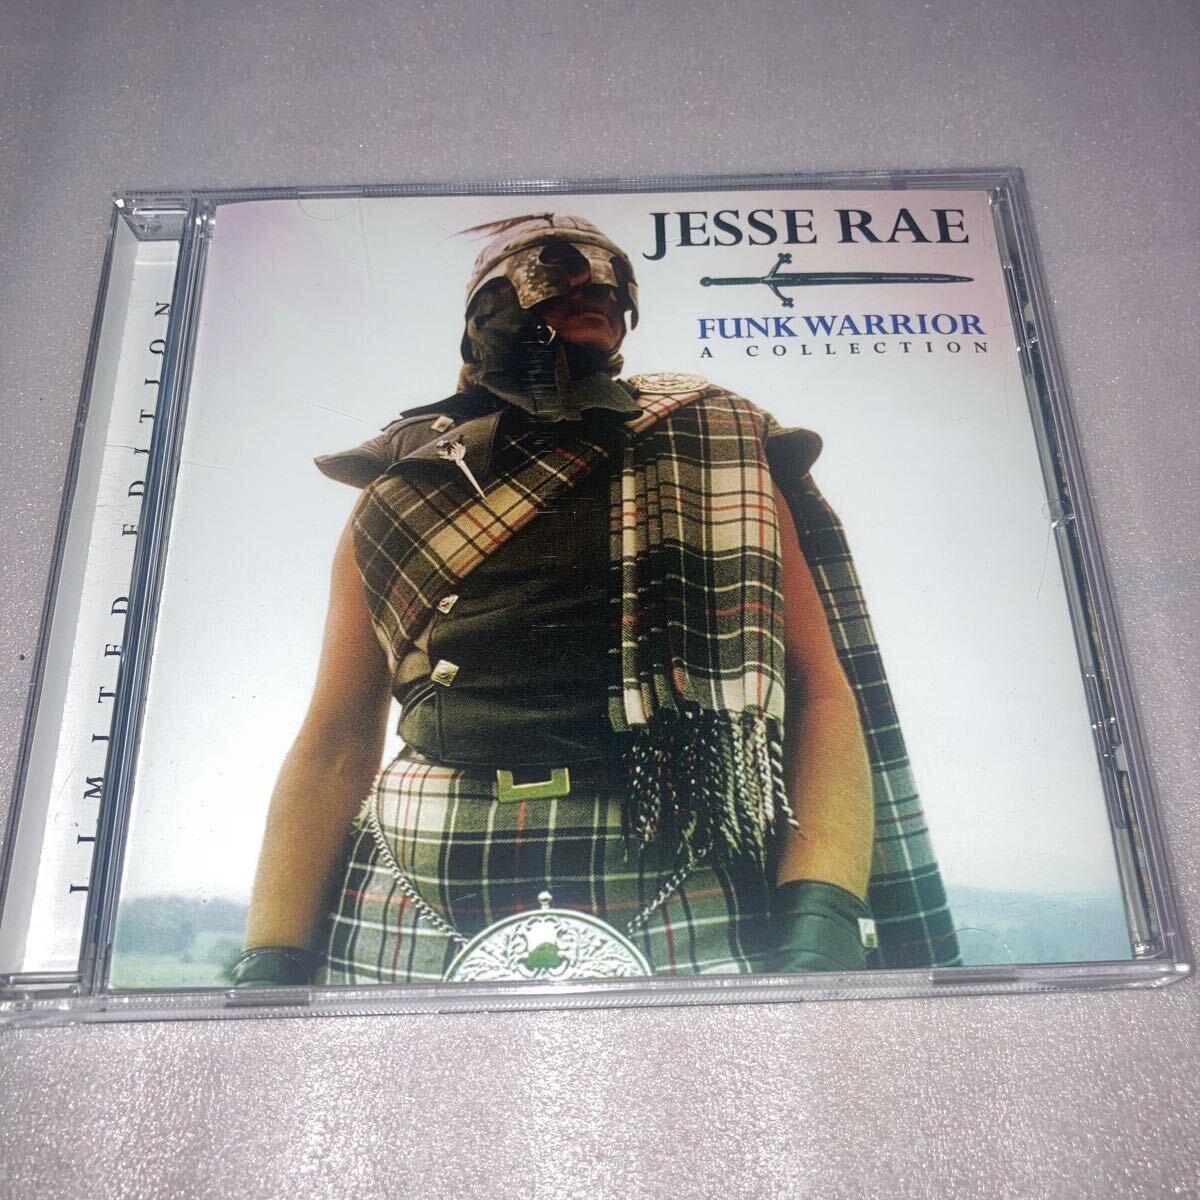 SOUL/FUNK/P-FUNK/JESSE RAE/Funk Warrior A Collectionの画像1